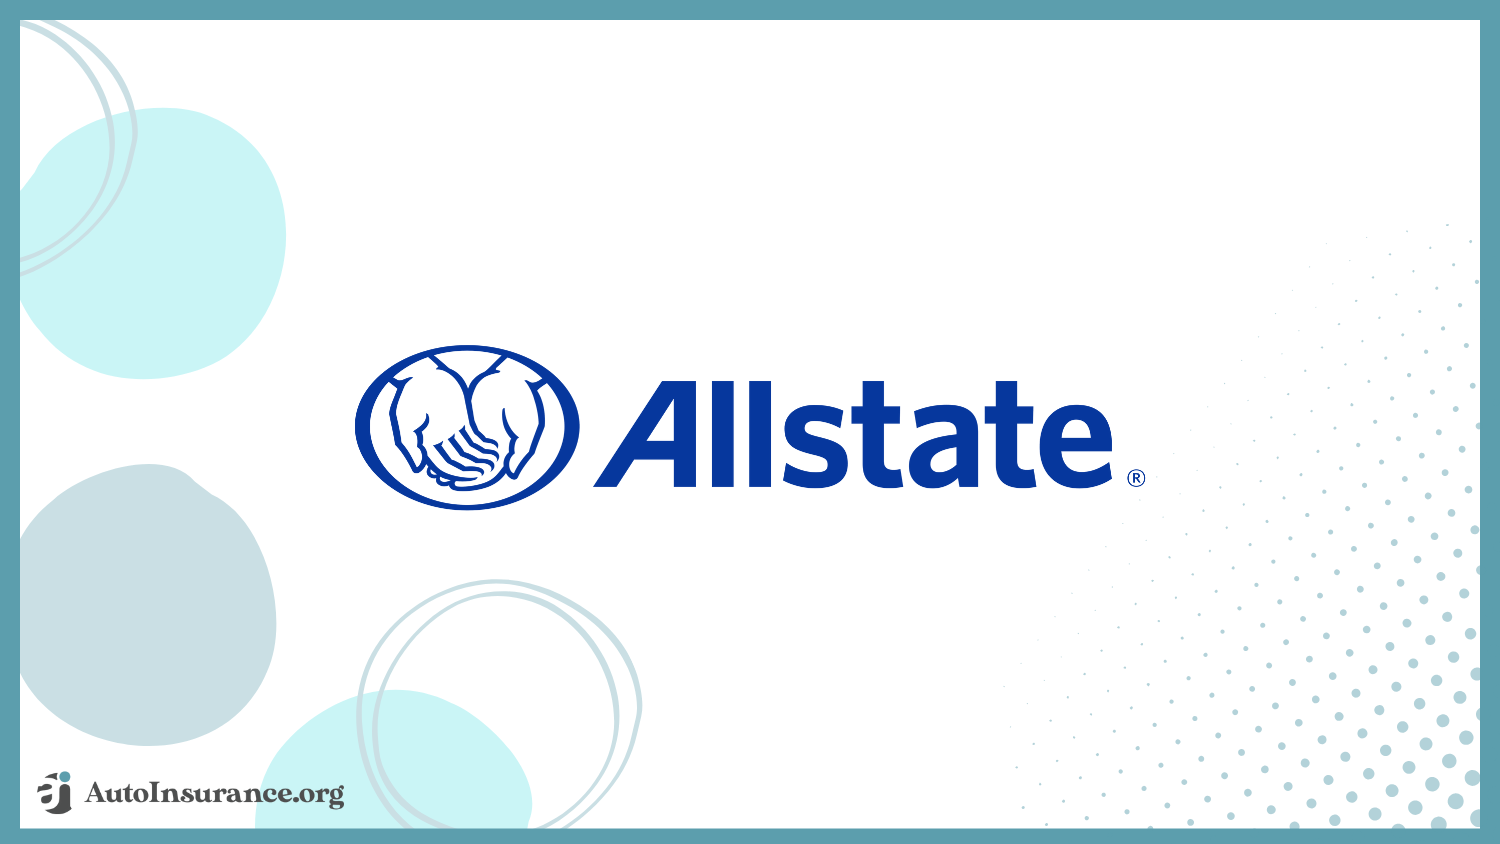 Allstate: Best Auto Insurance Companies for High-Risk Drivers 